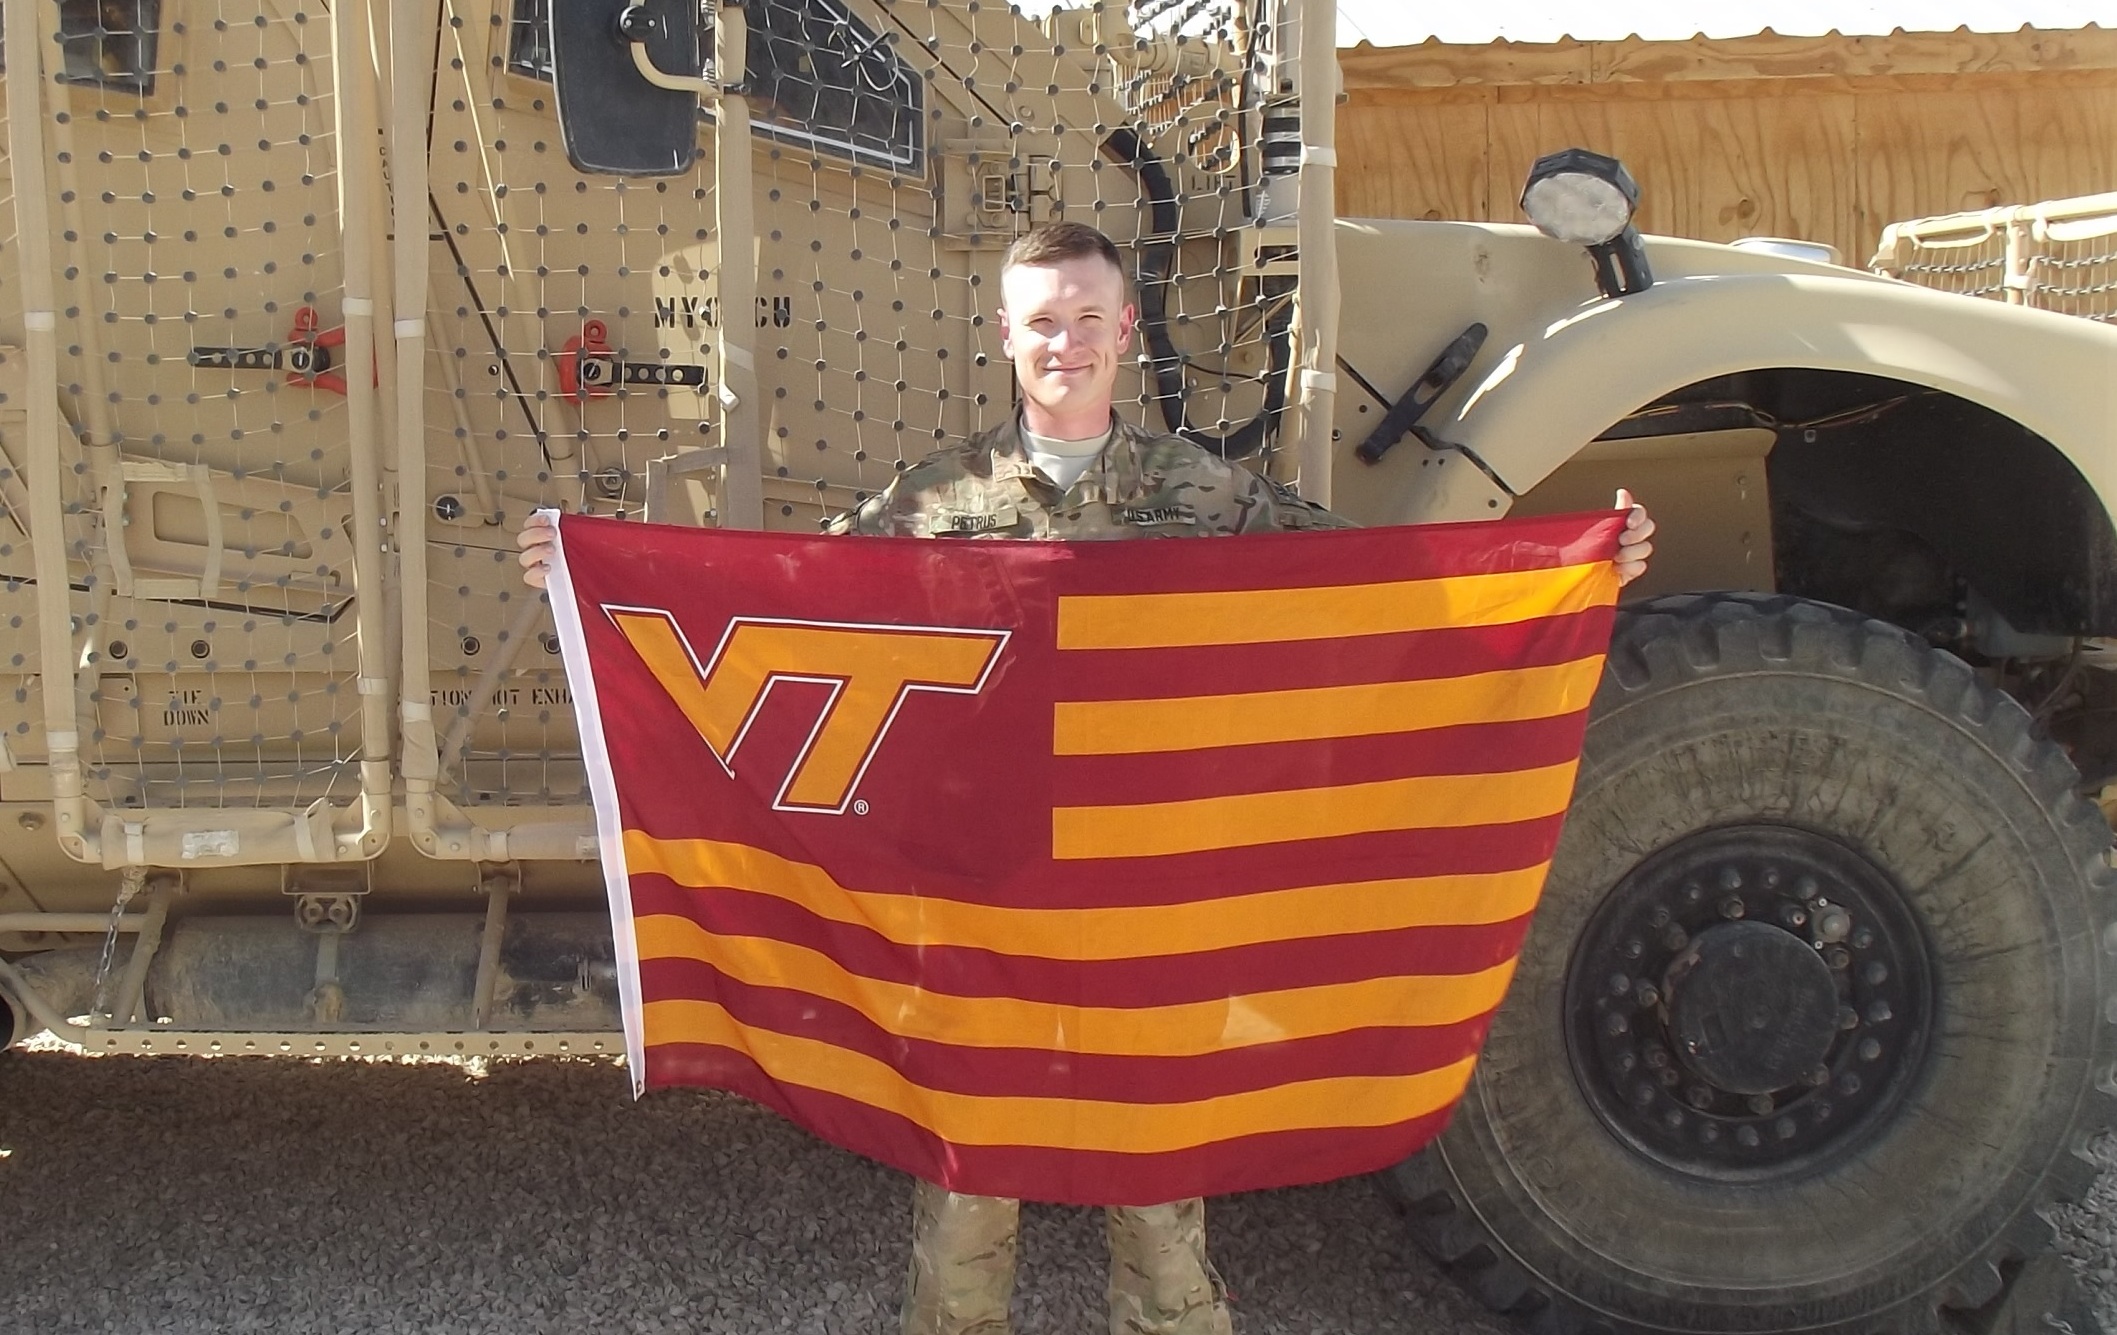 Capt. Joshua Petrus, U.S. Army, Virginia Tech Corps of Cadets Class of 2008 in Afghanistan.